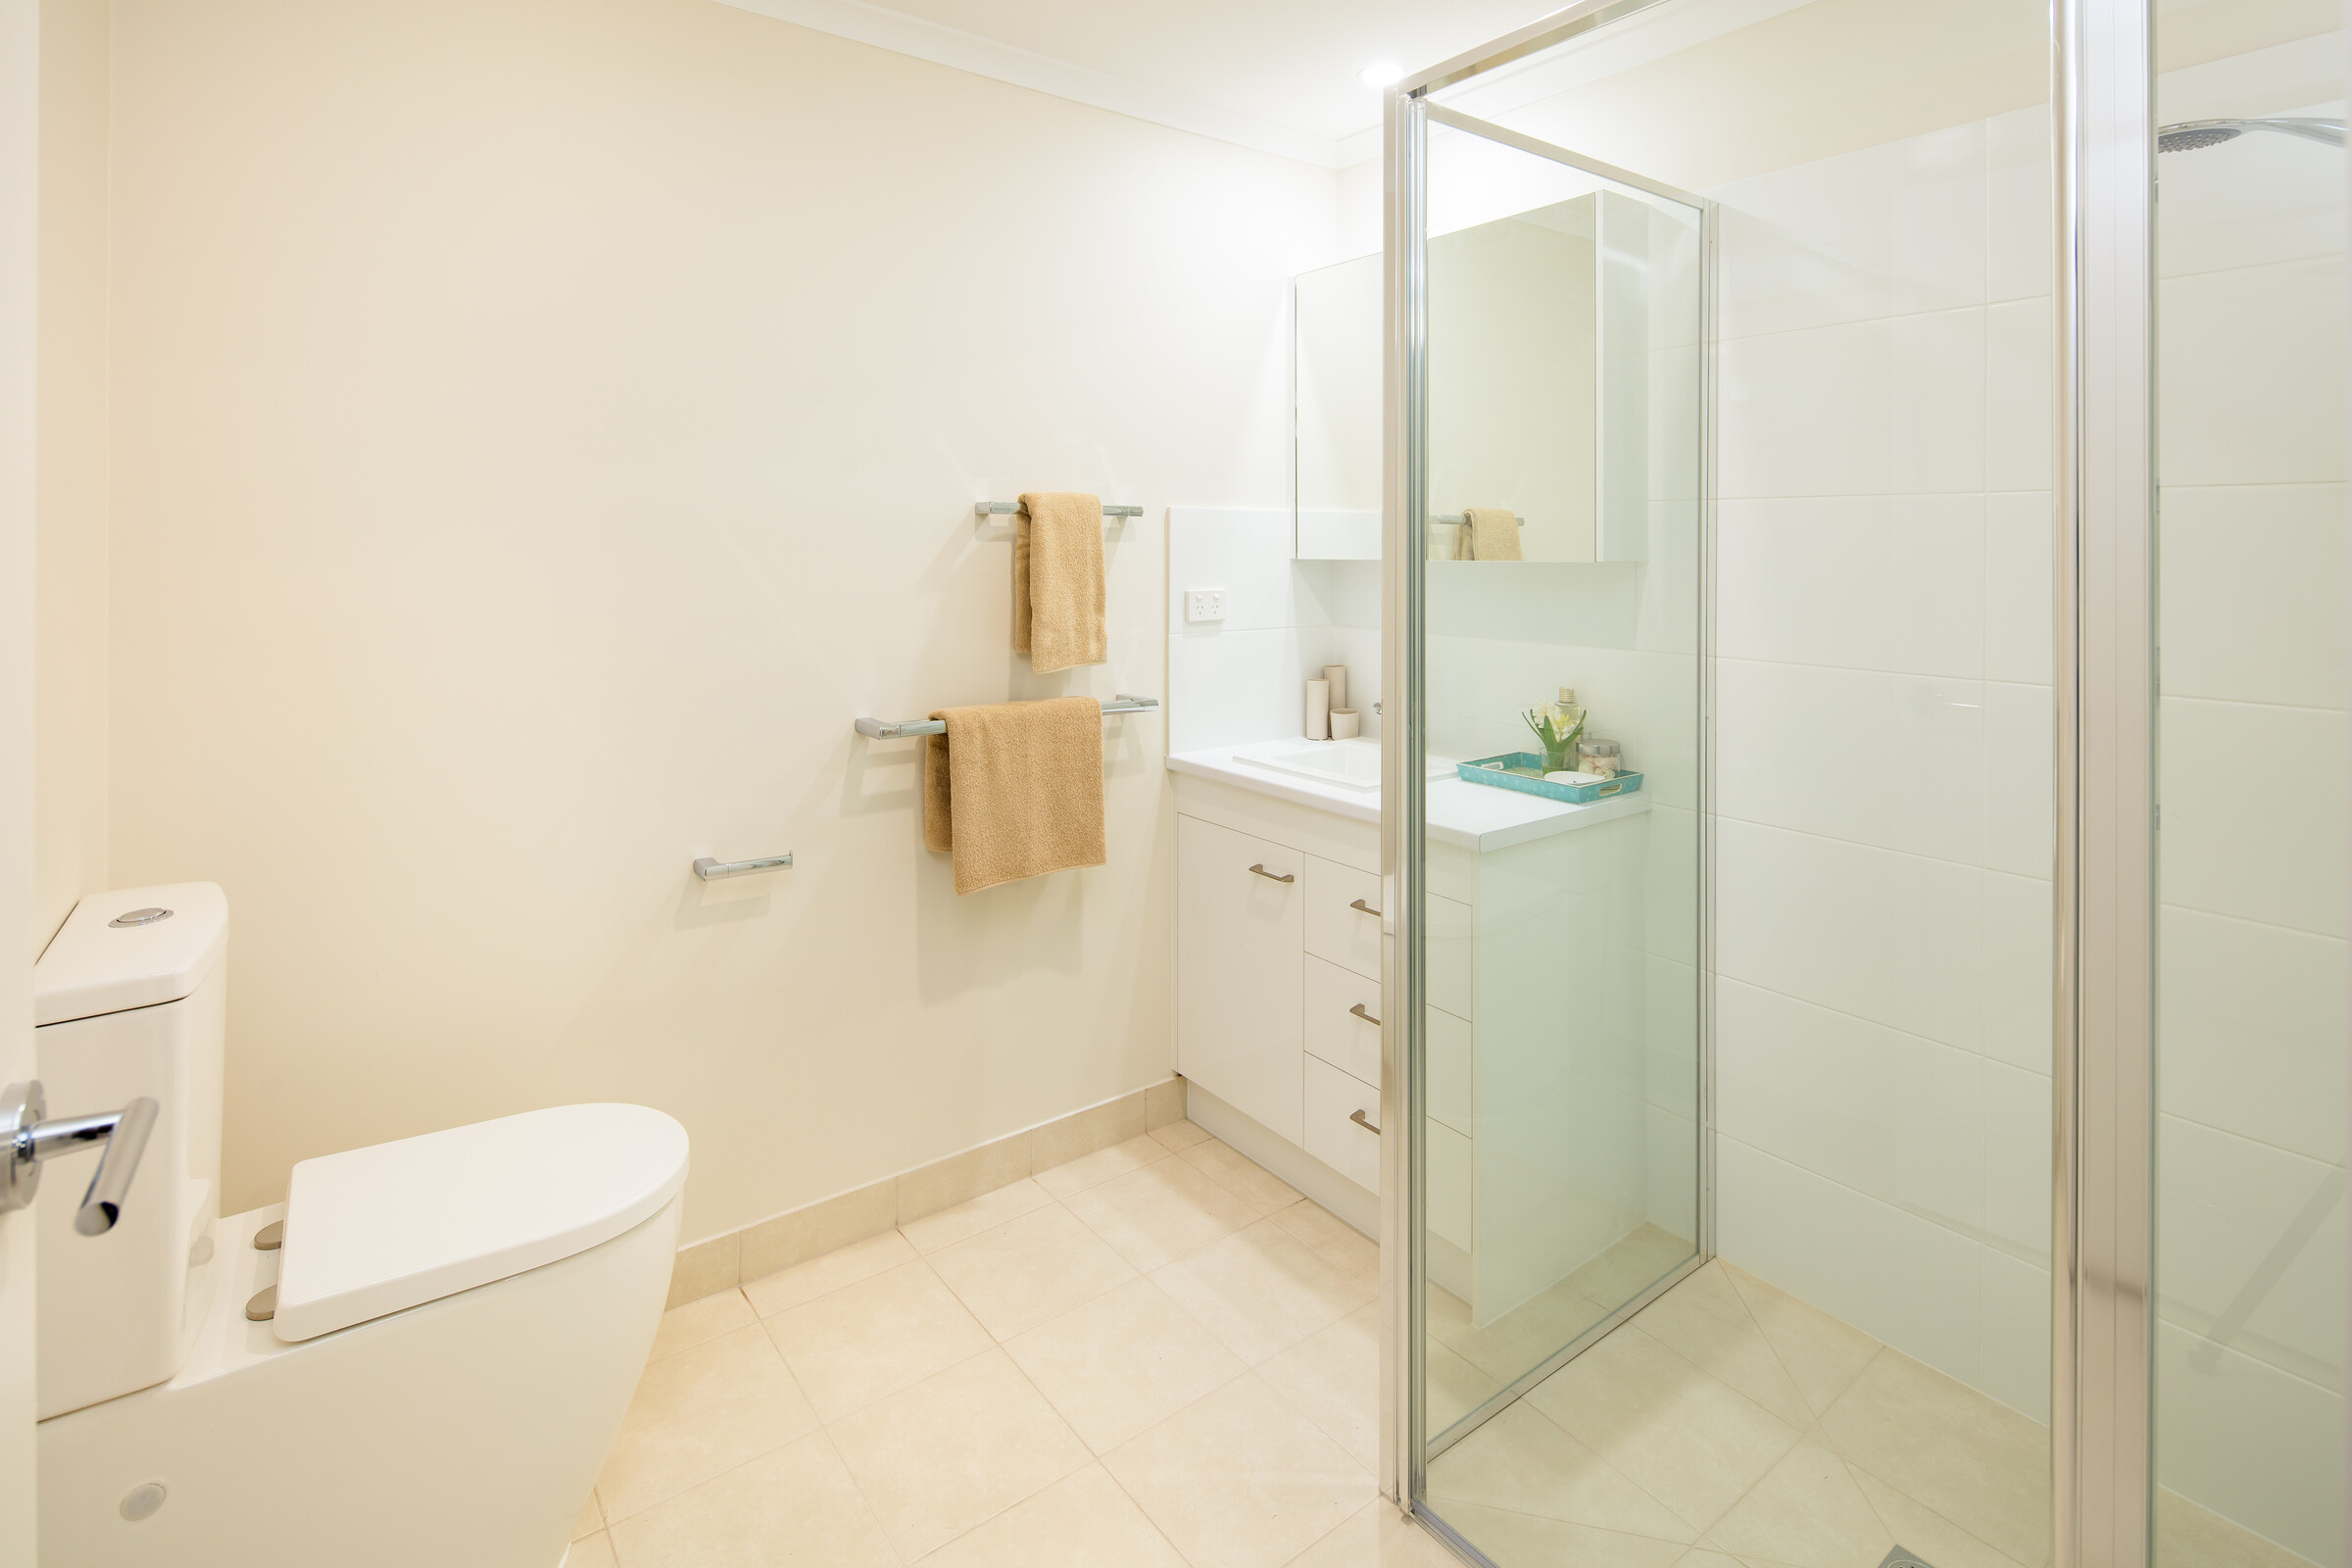 Meadowvale Village modern bathroom with glass shower, toilet, sink and medicine cabinet with mirror